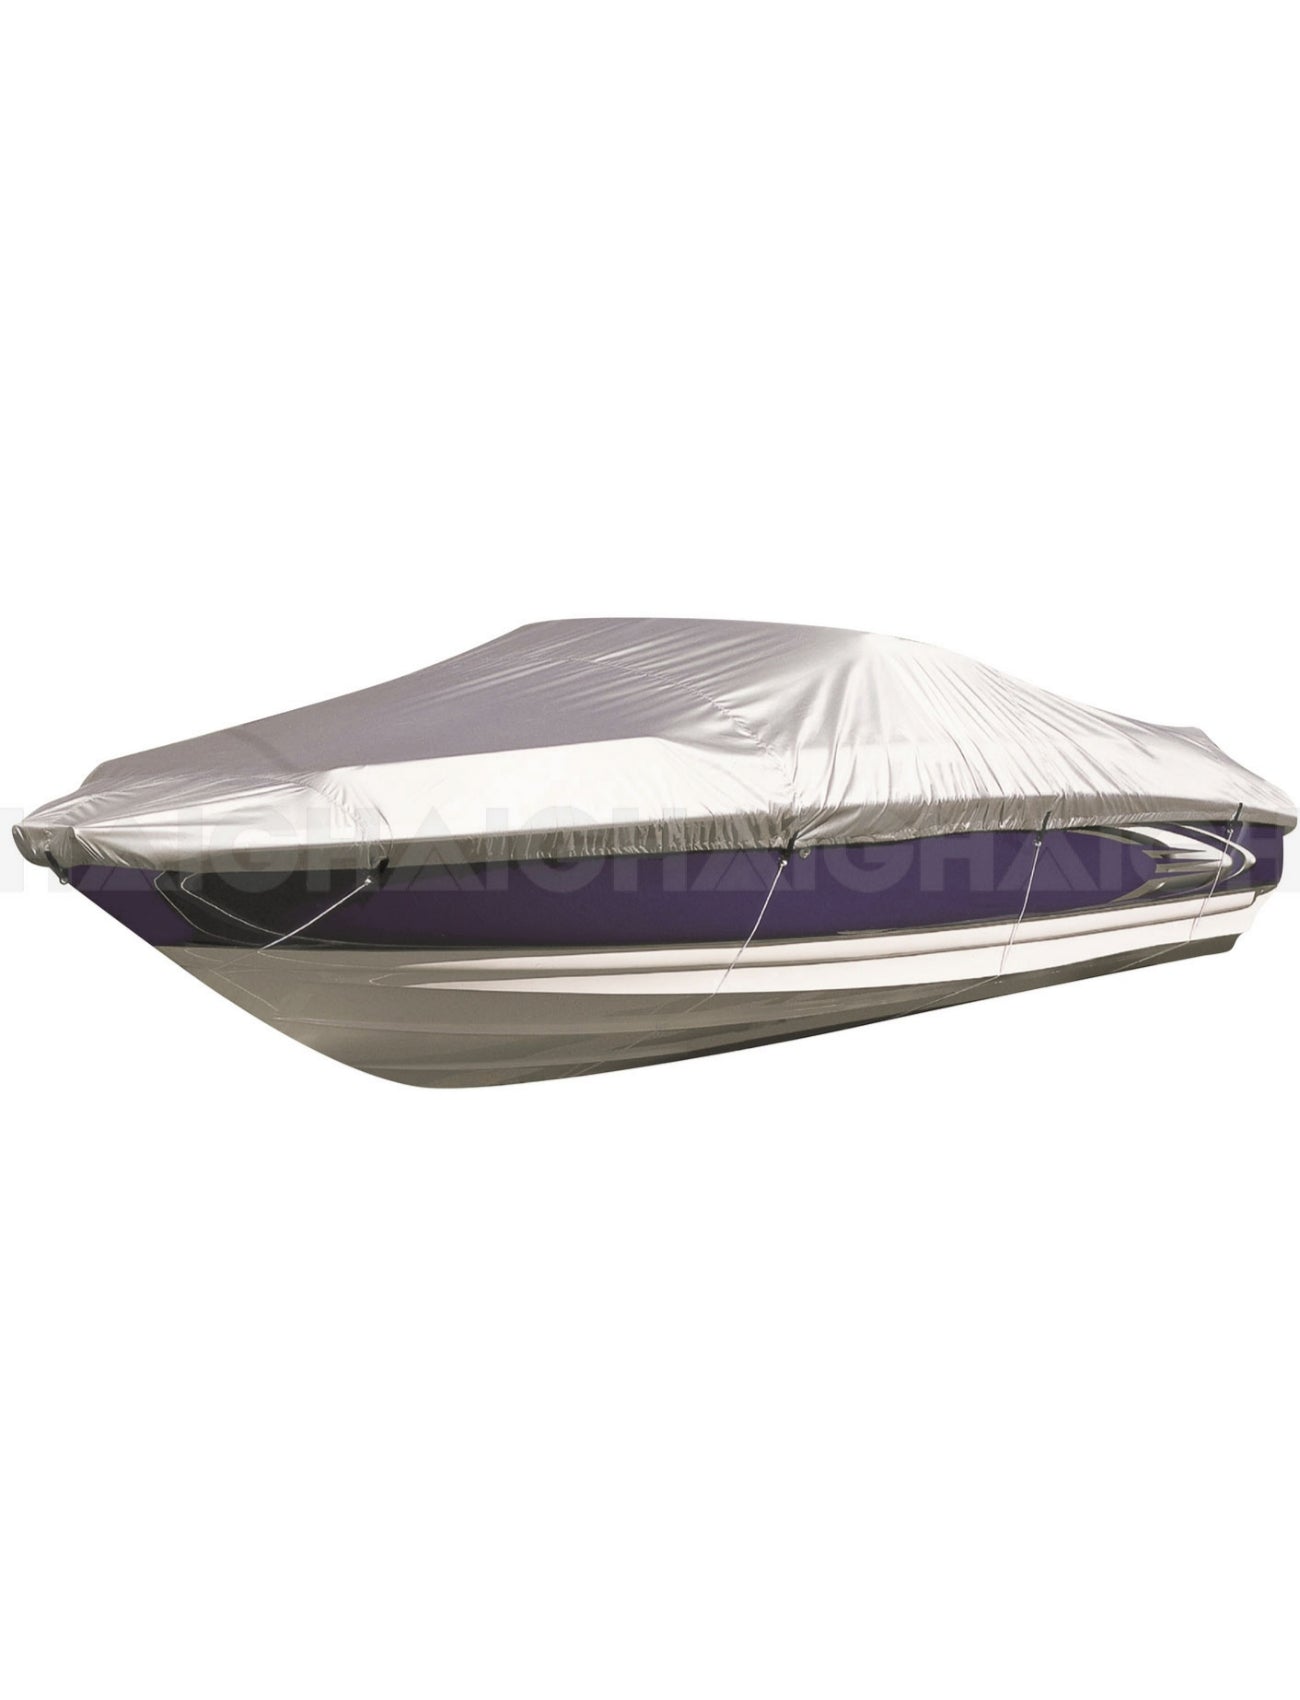 BOAT COVER SUNLAND FITS 5.2m - 5.8m